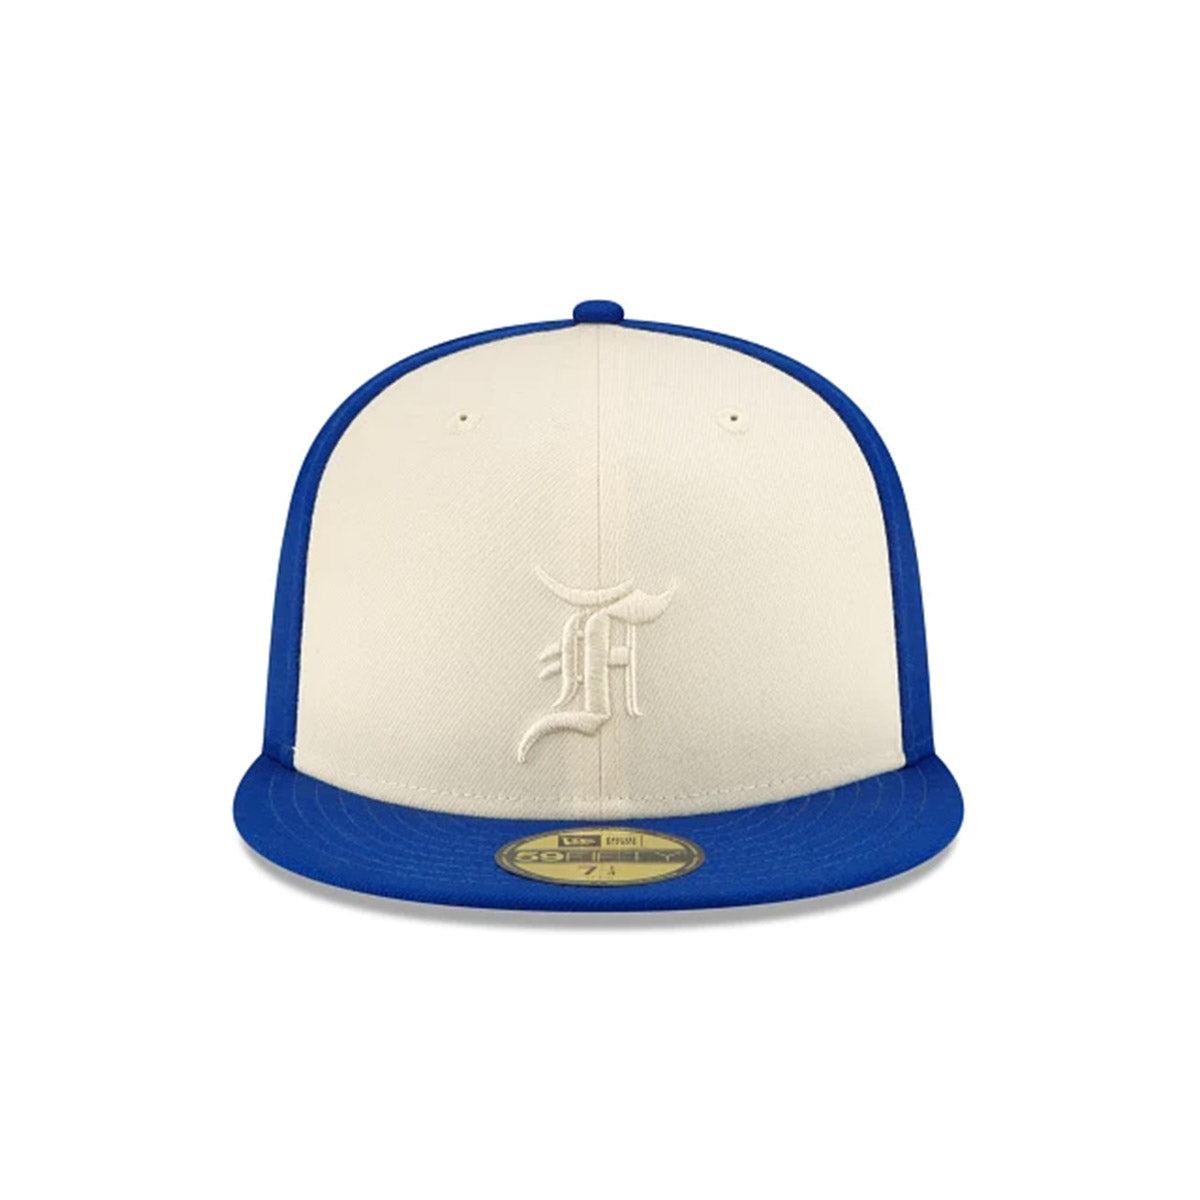 '+ FEAR OF GOD ESSENTIALS 59FIFTY Closed Blue